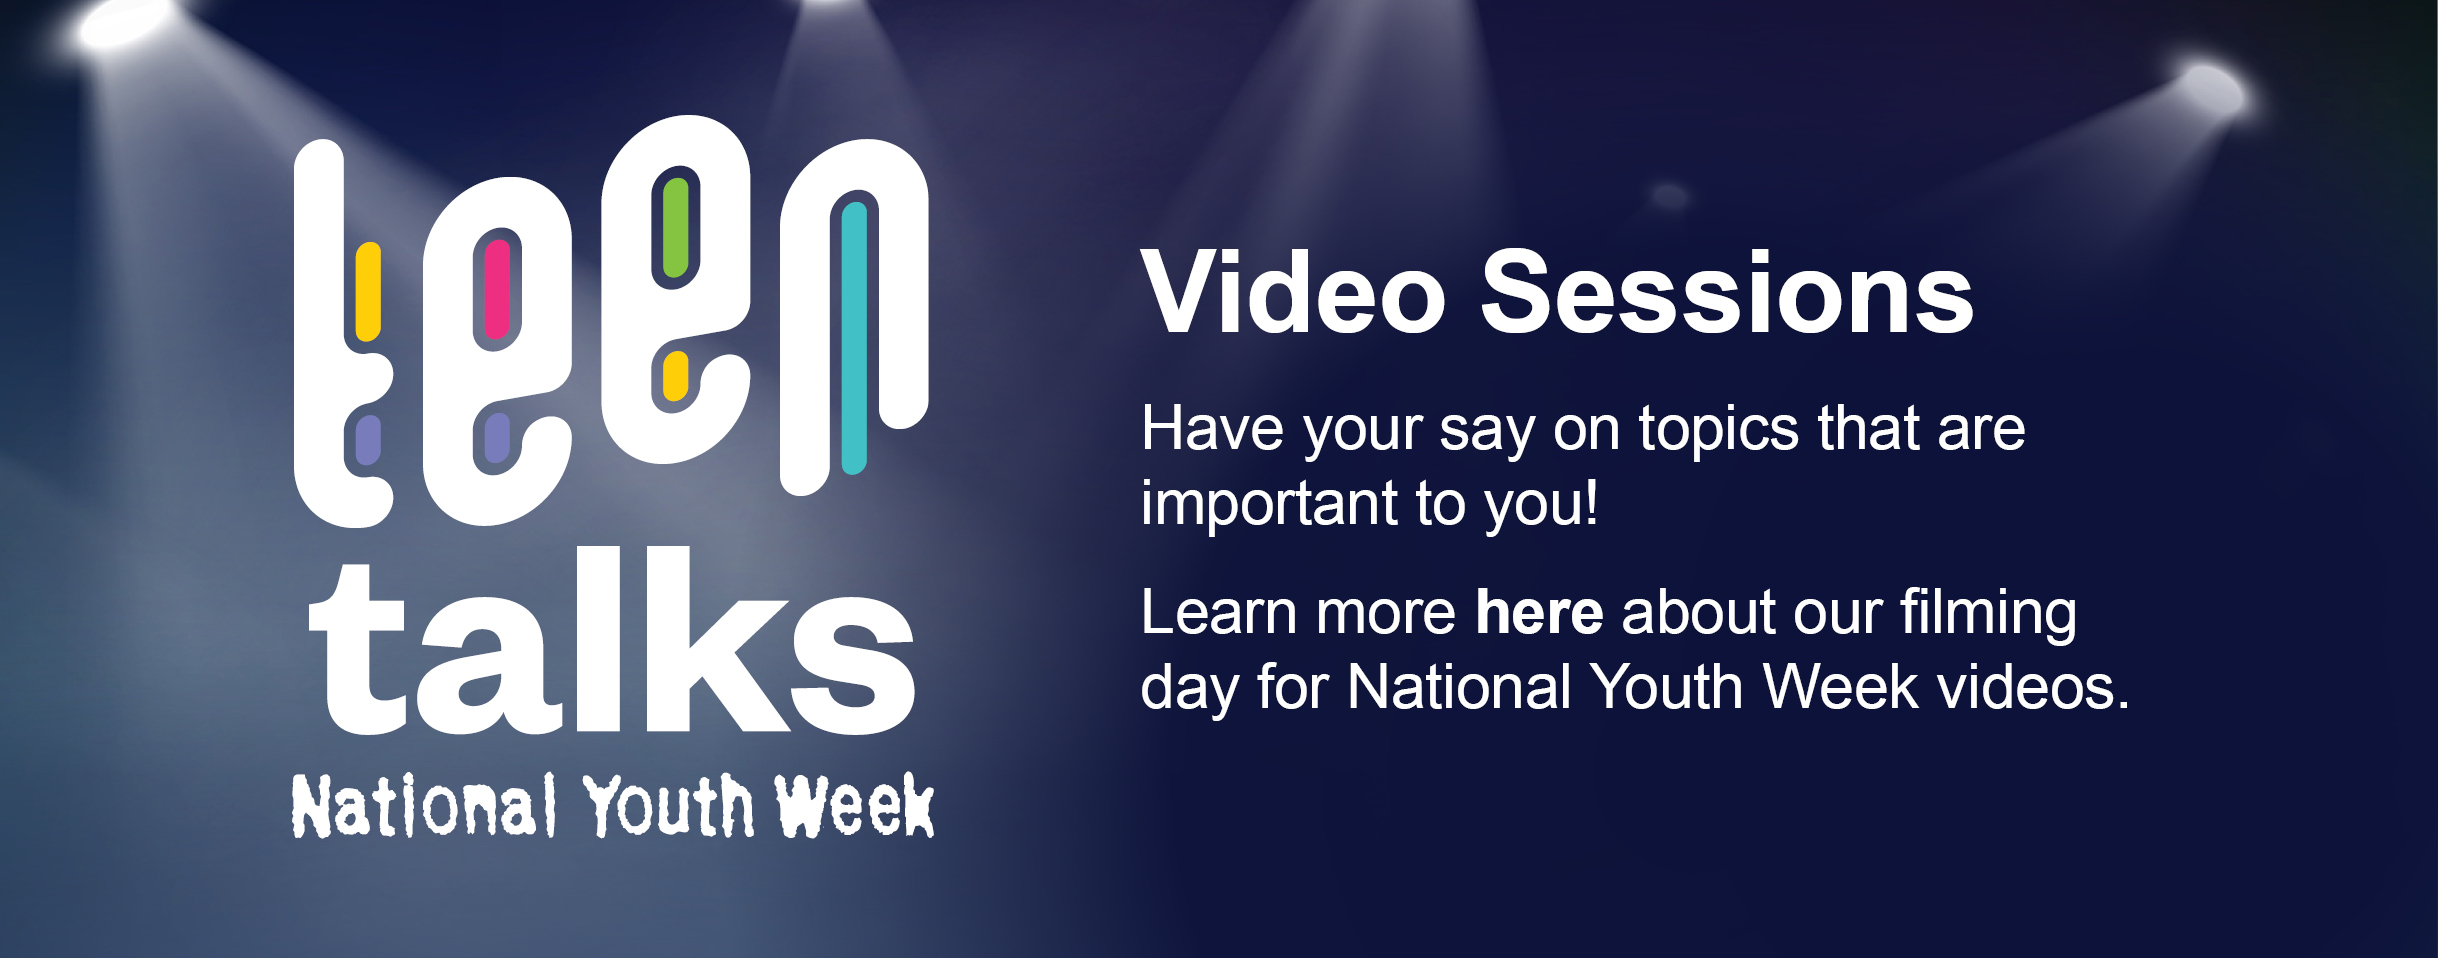 Teen Talks logo with the words National Youth Week underneath it. Text reads: Video Sessions. Have your say on topics that are important to you! Learn more here about filming day for National Youth Week videos. 